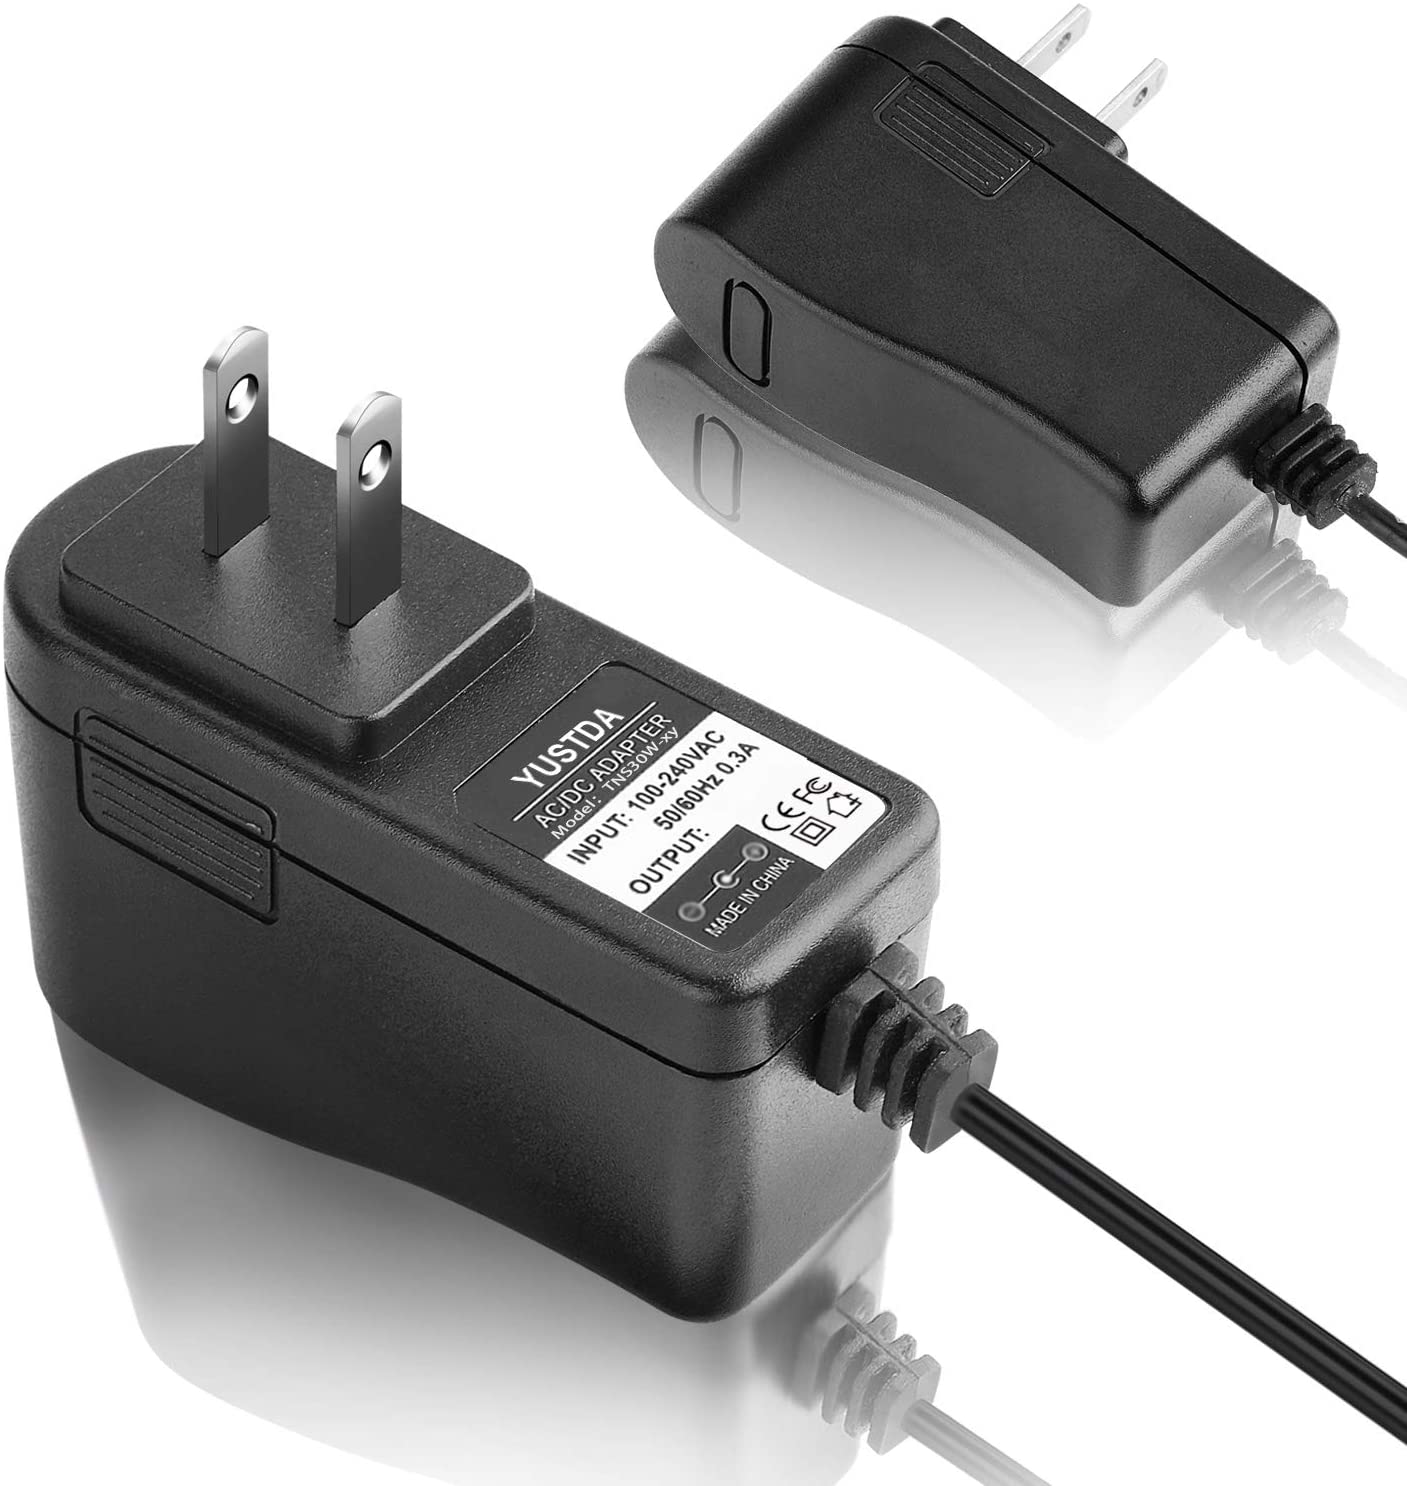 Yustda 12V AC/DC Adapter Replacement for Roland ACO-120T Model: A41210T Boss Electric Piano Keyboard Class 2 Transformer 12VDC DC12V 12.0V 12 Volts Power Supply Cord Home Wall Charger PSU - image 2 of 4